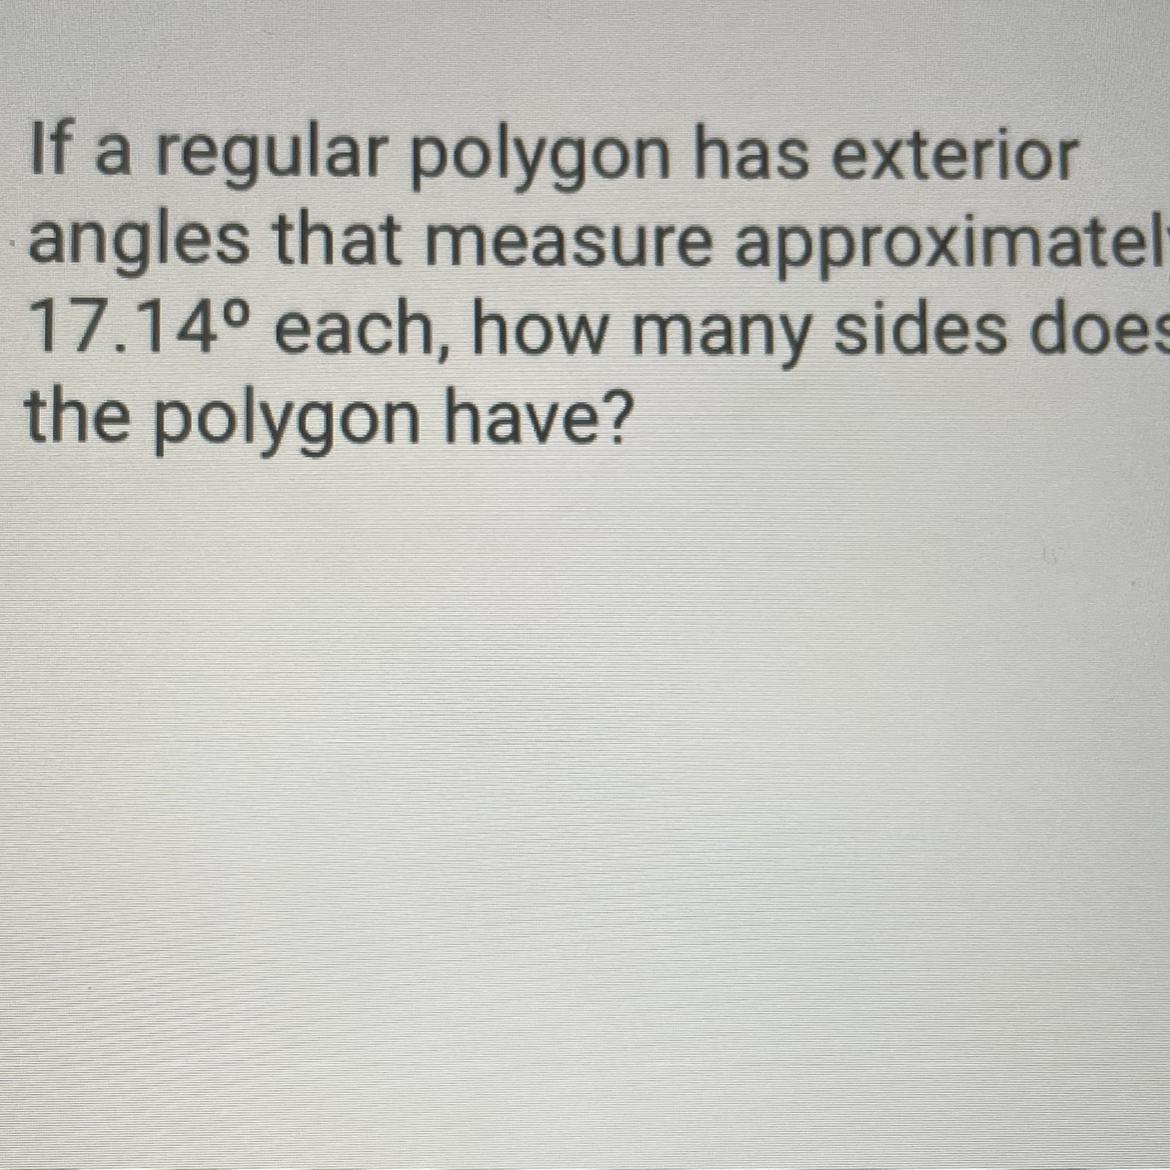 If A Regular Polygon Has Exteriorangles That Measure Approximately17.14 Each, How Many Sides Doesthe